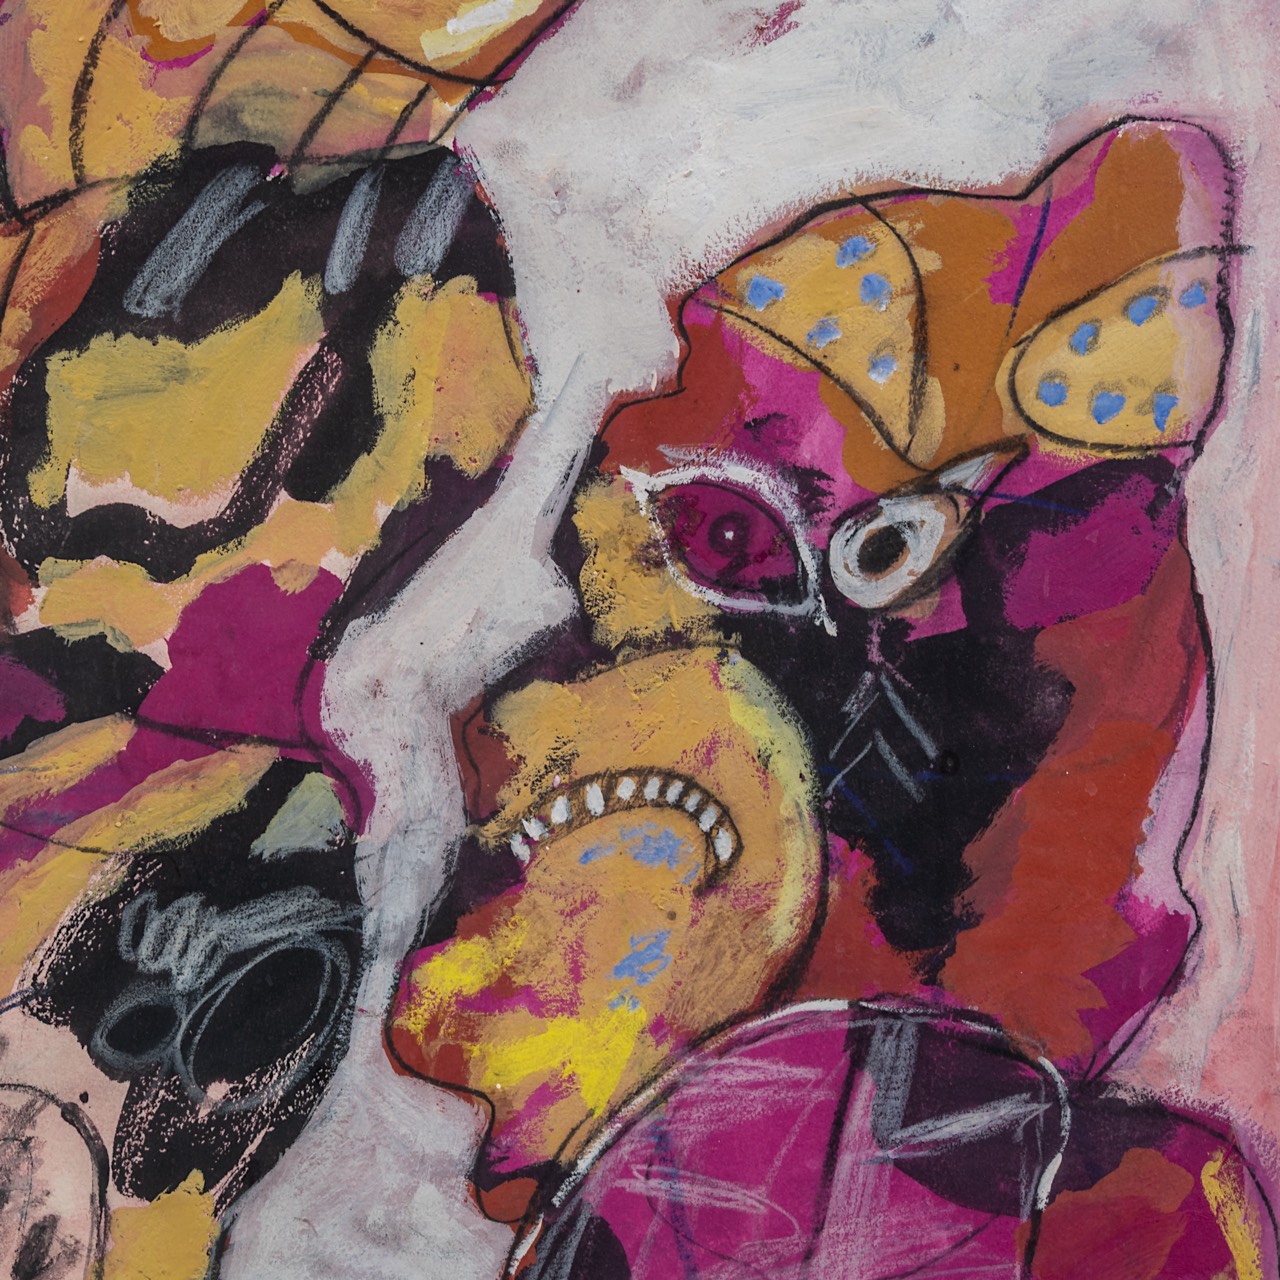 Lucebert (1924-1994), 'San Roque', 1965, pastel and gouache on paper 77 x 52 cm. (30.3 x 20.4 in.), - Image 5 of 6